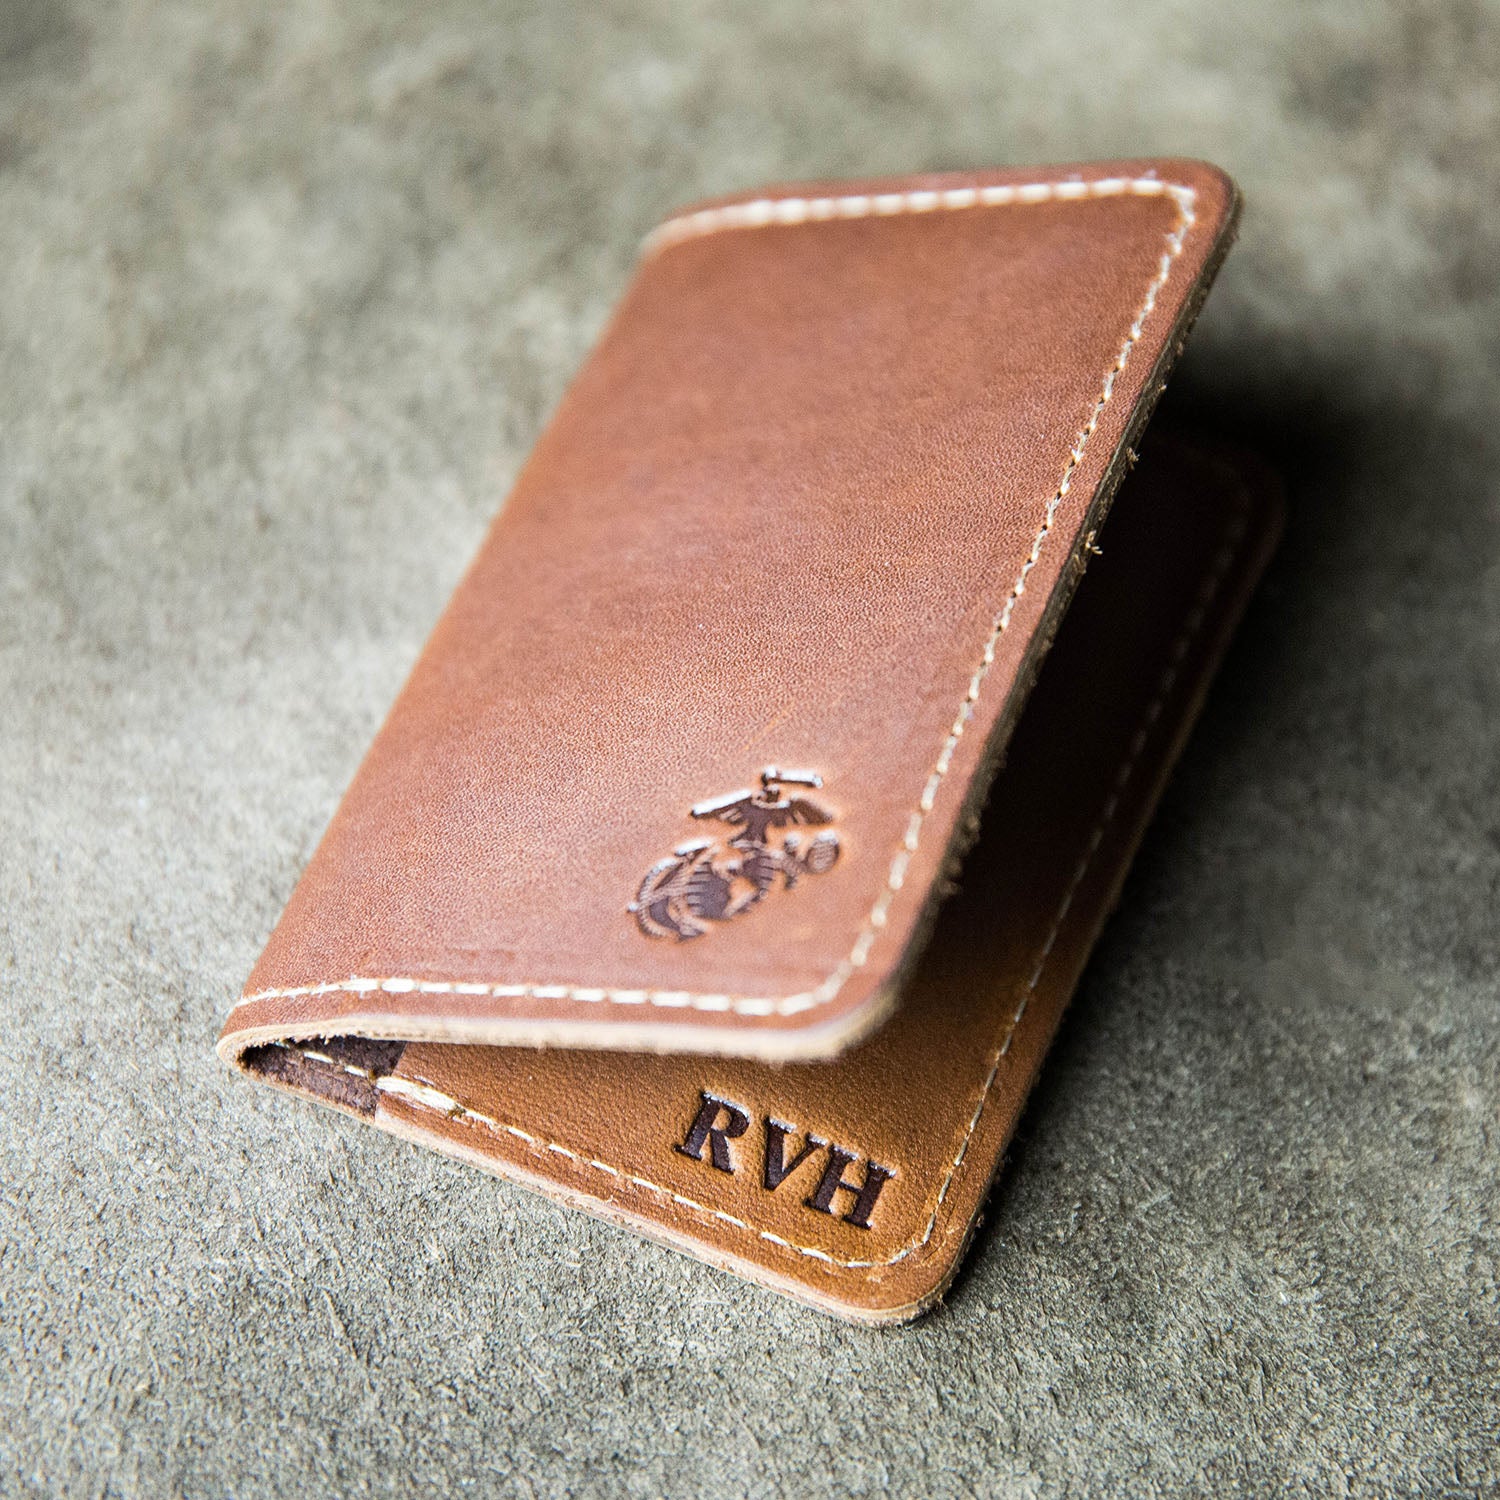 Fine leather bifold wallet and business card holder with Marine Corps logo